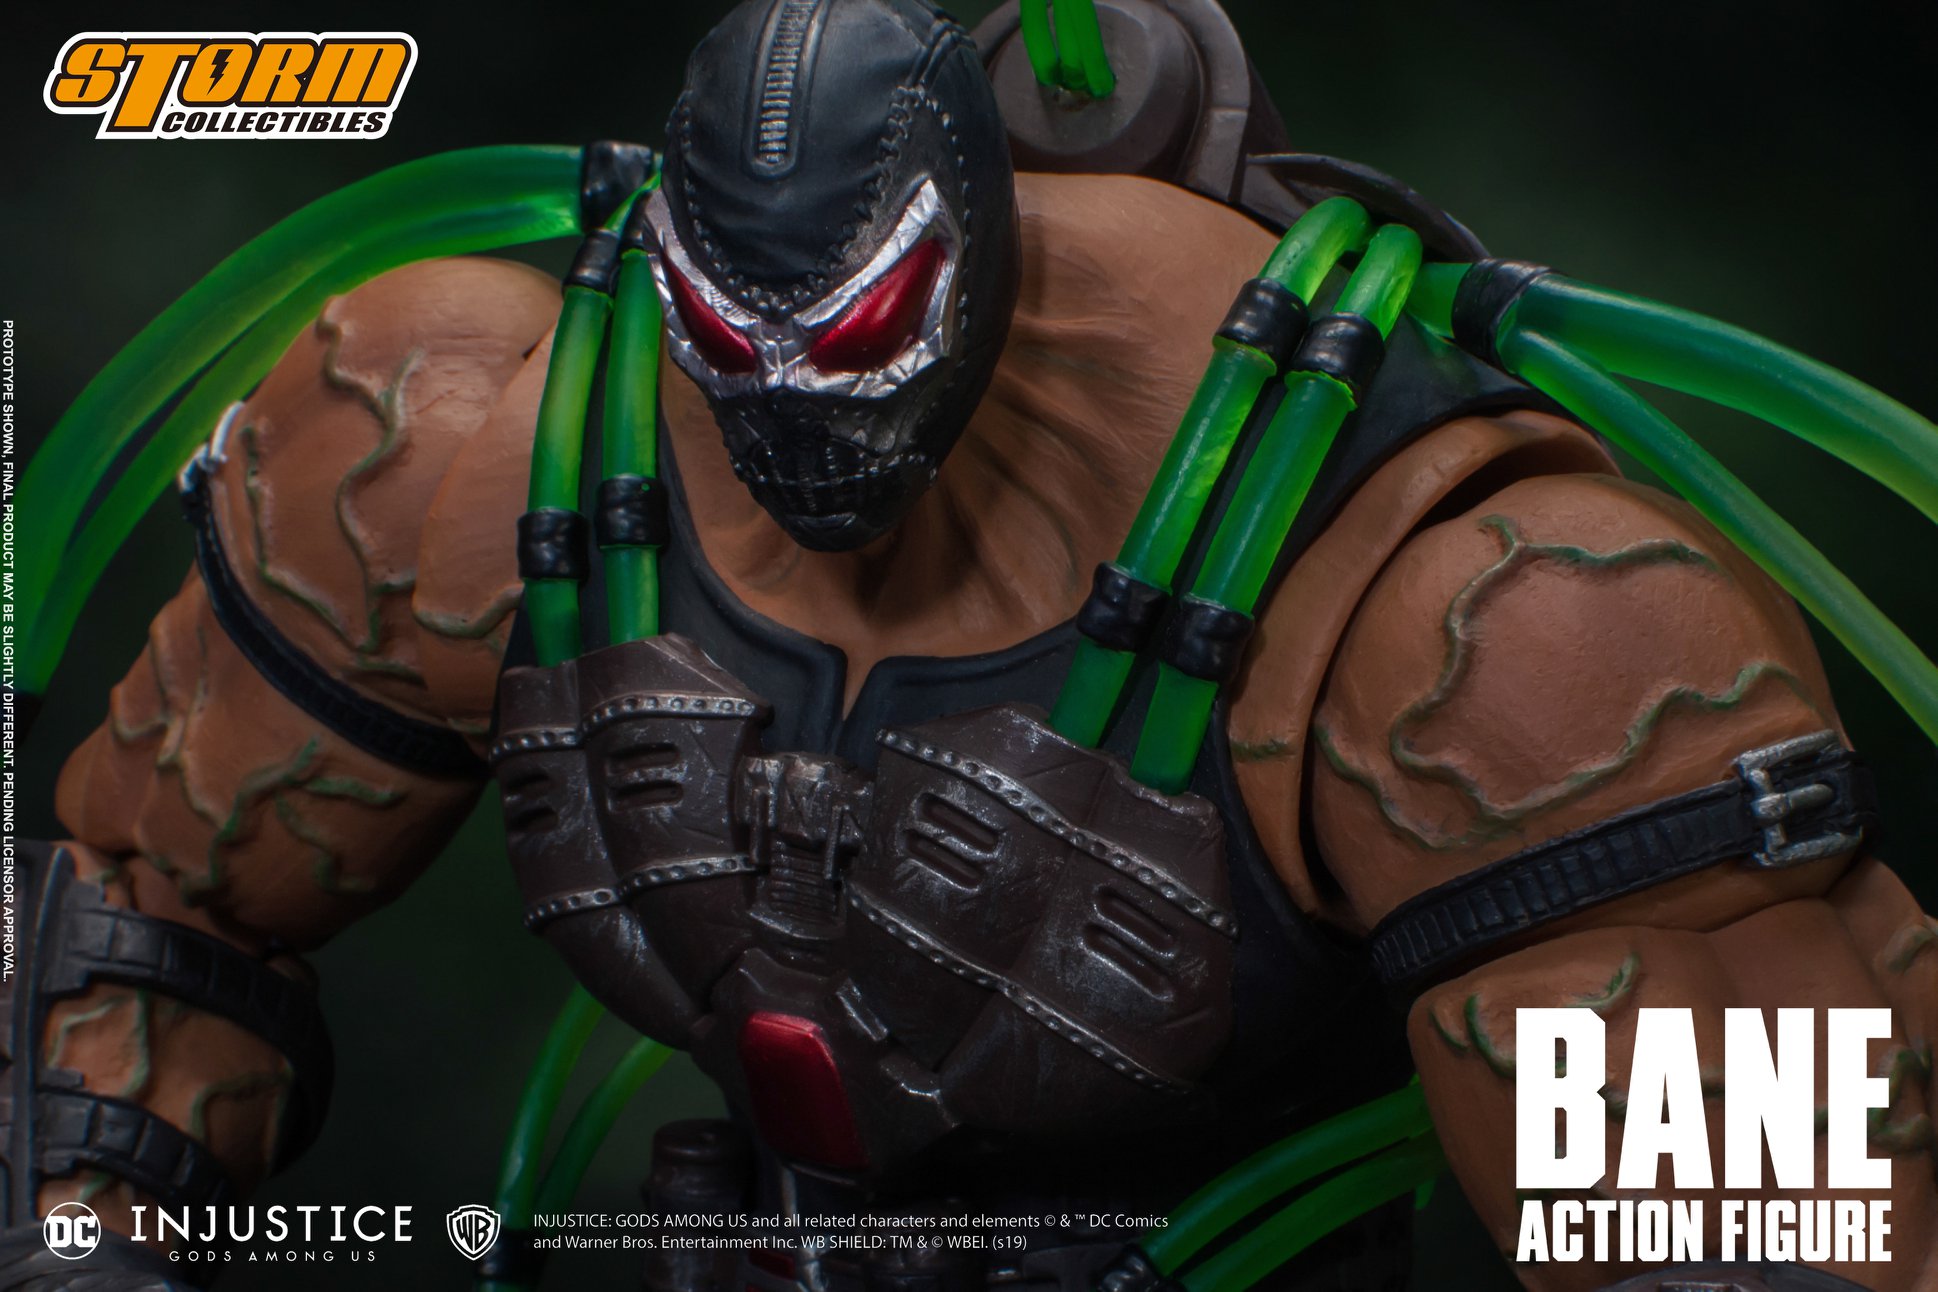 Storm Collectibles Injustice Bane Figure